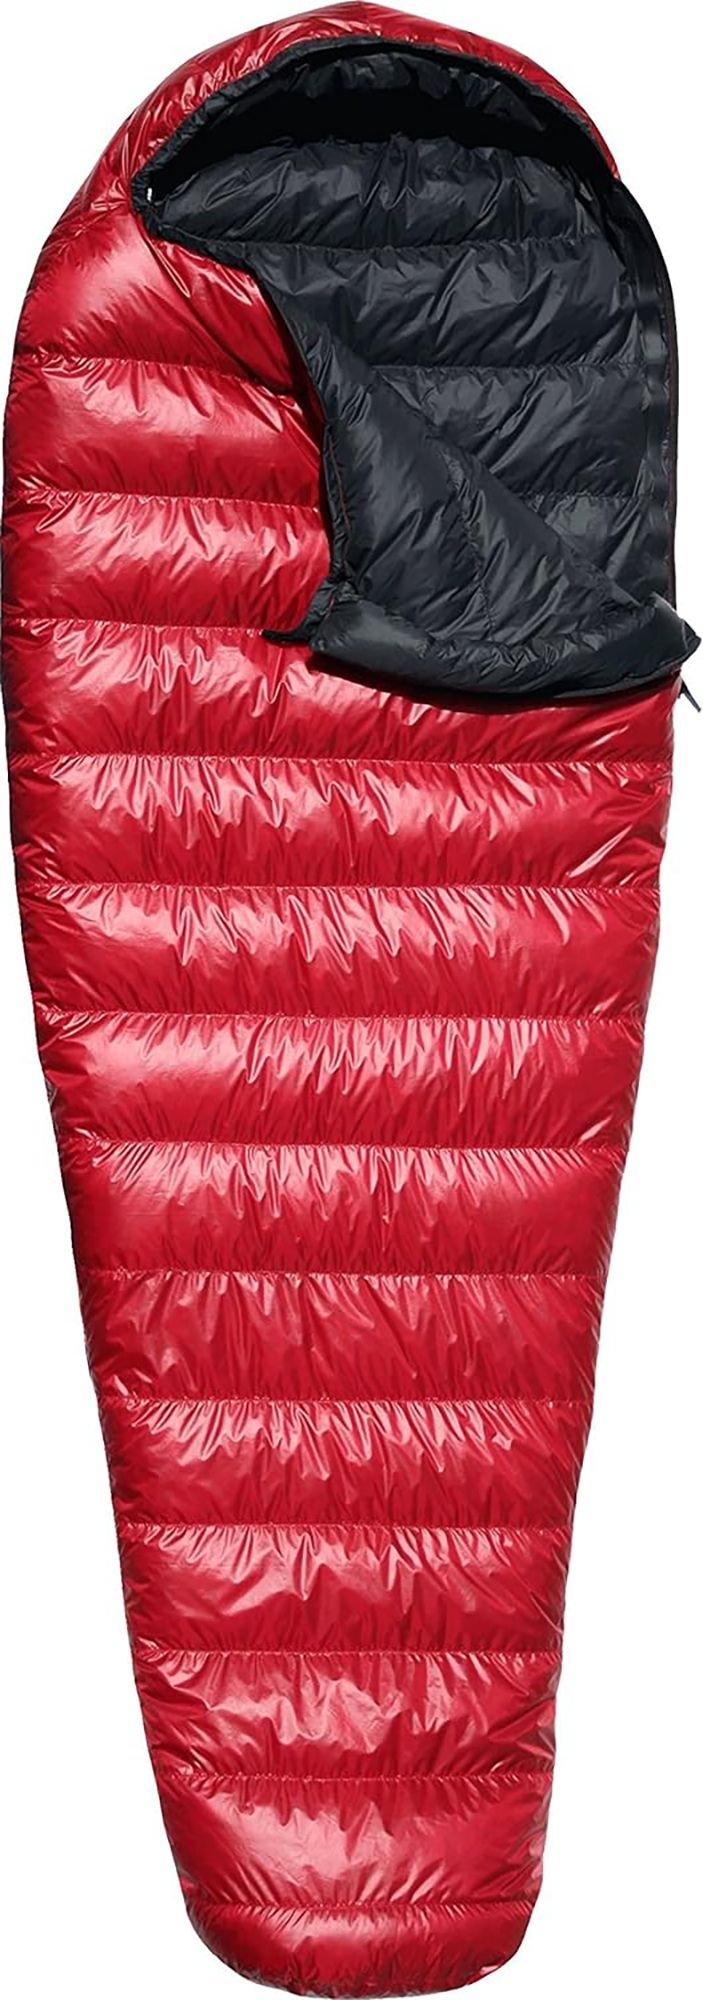 Photos - Suitcase / Backpack Cover Western Mountaineering SummerLite 32 Degree Sleeping Bag, Right Hand, Men'